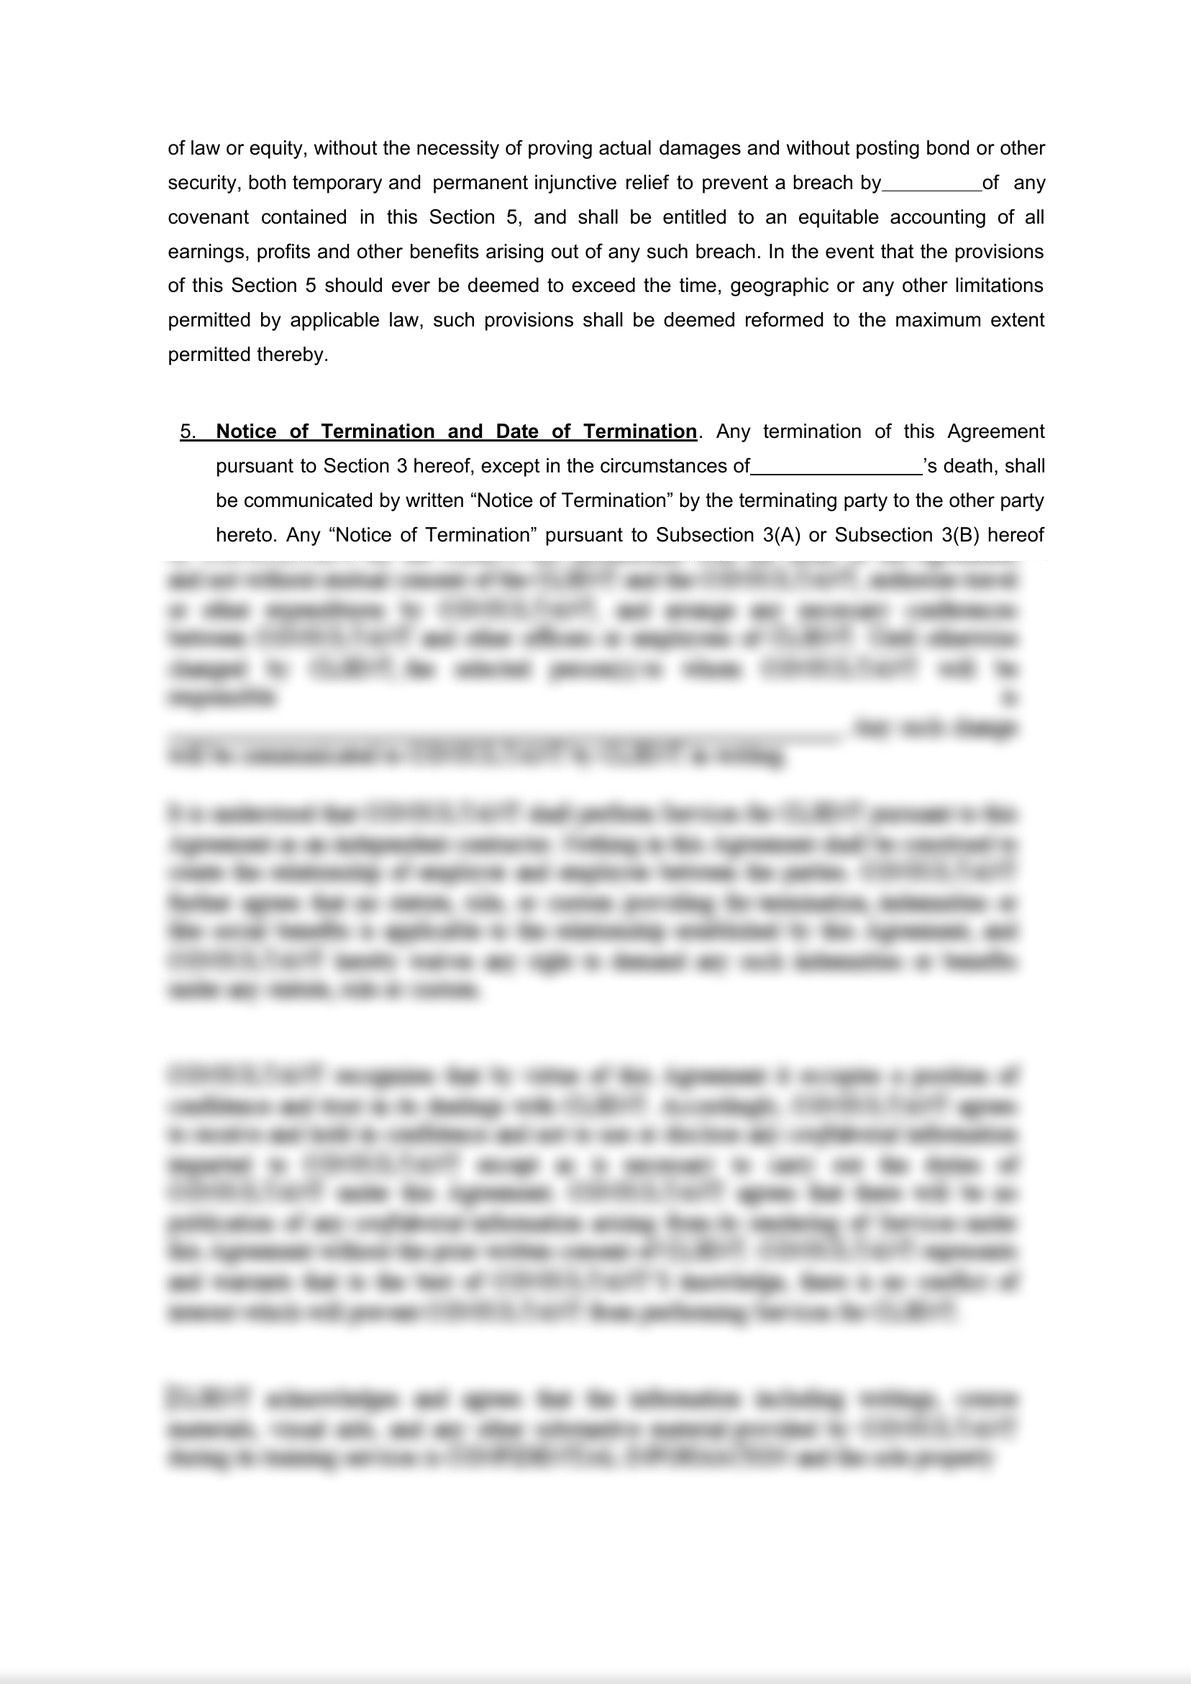 General Commission Agreement-6